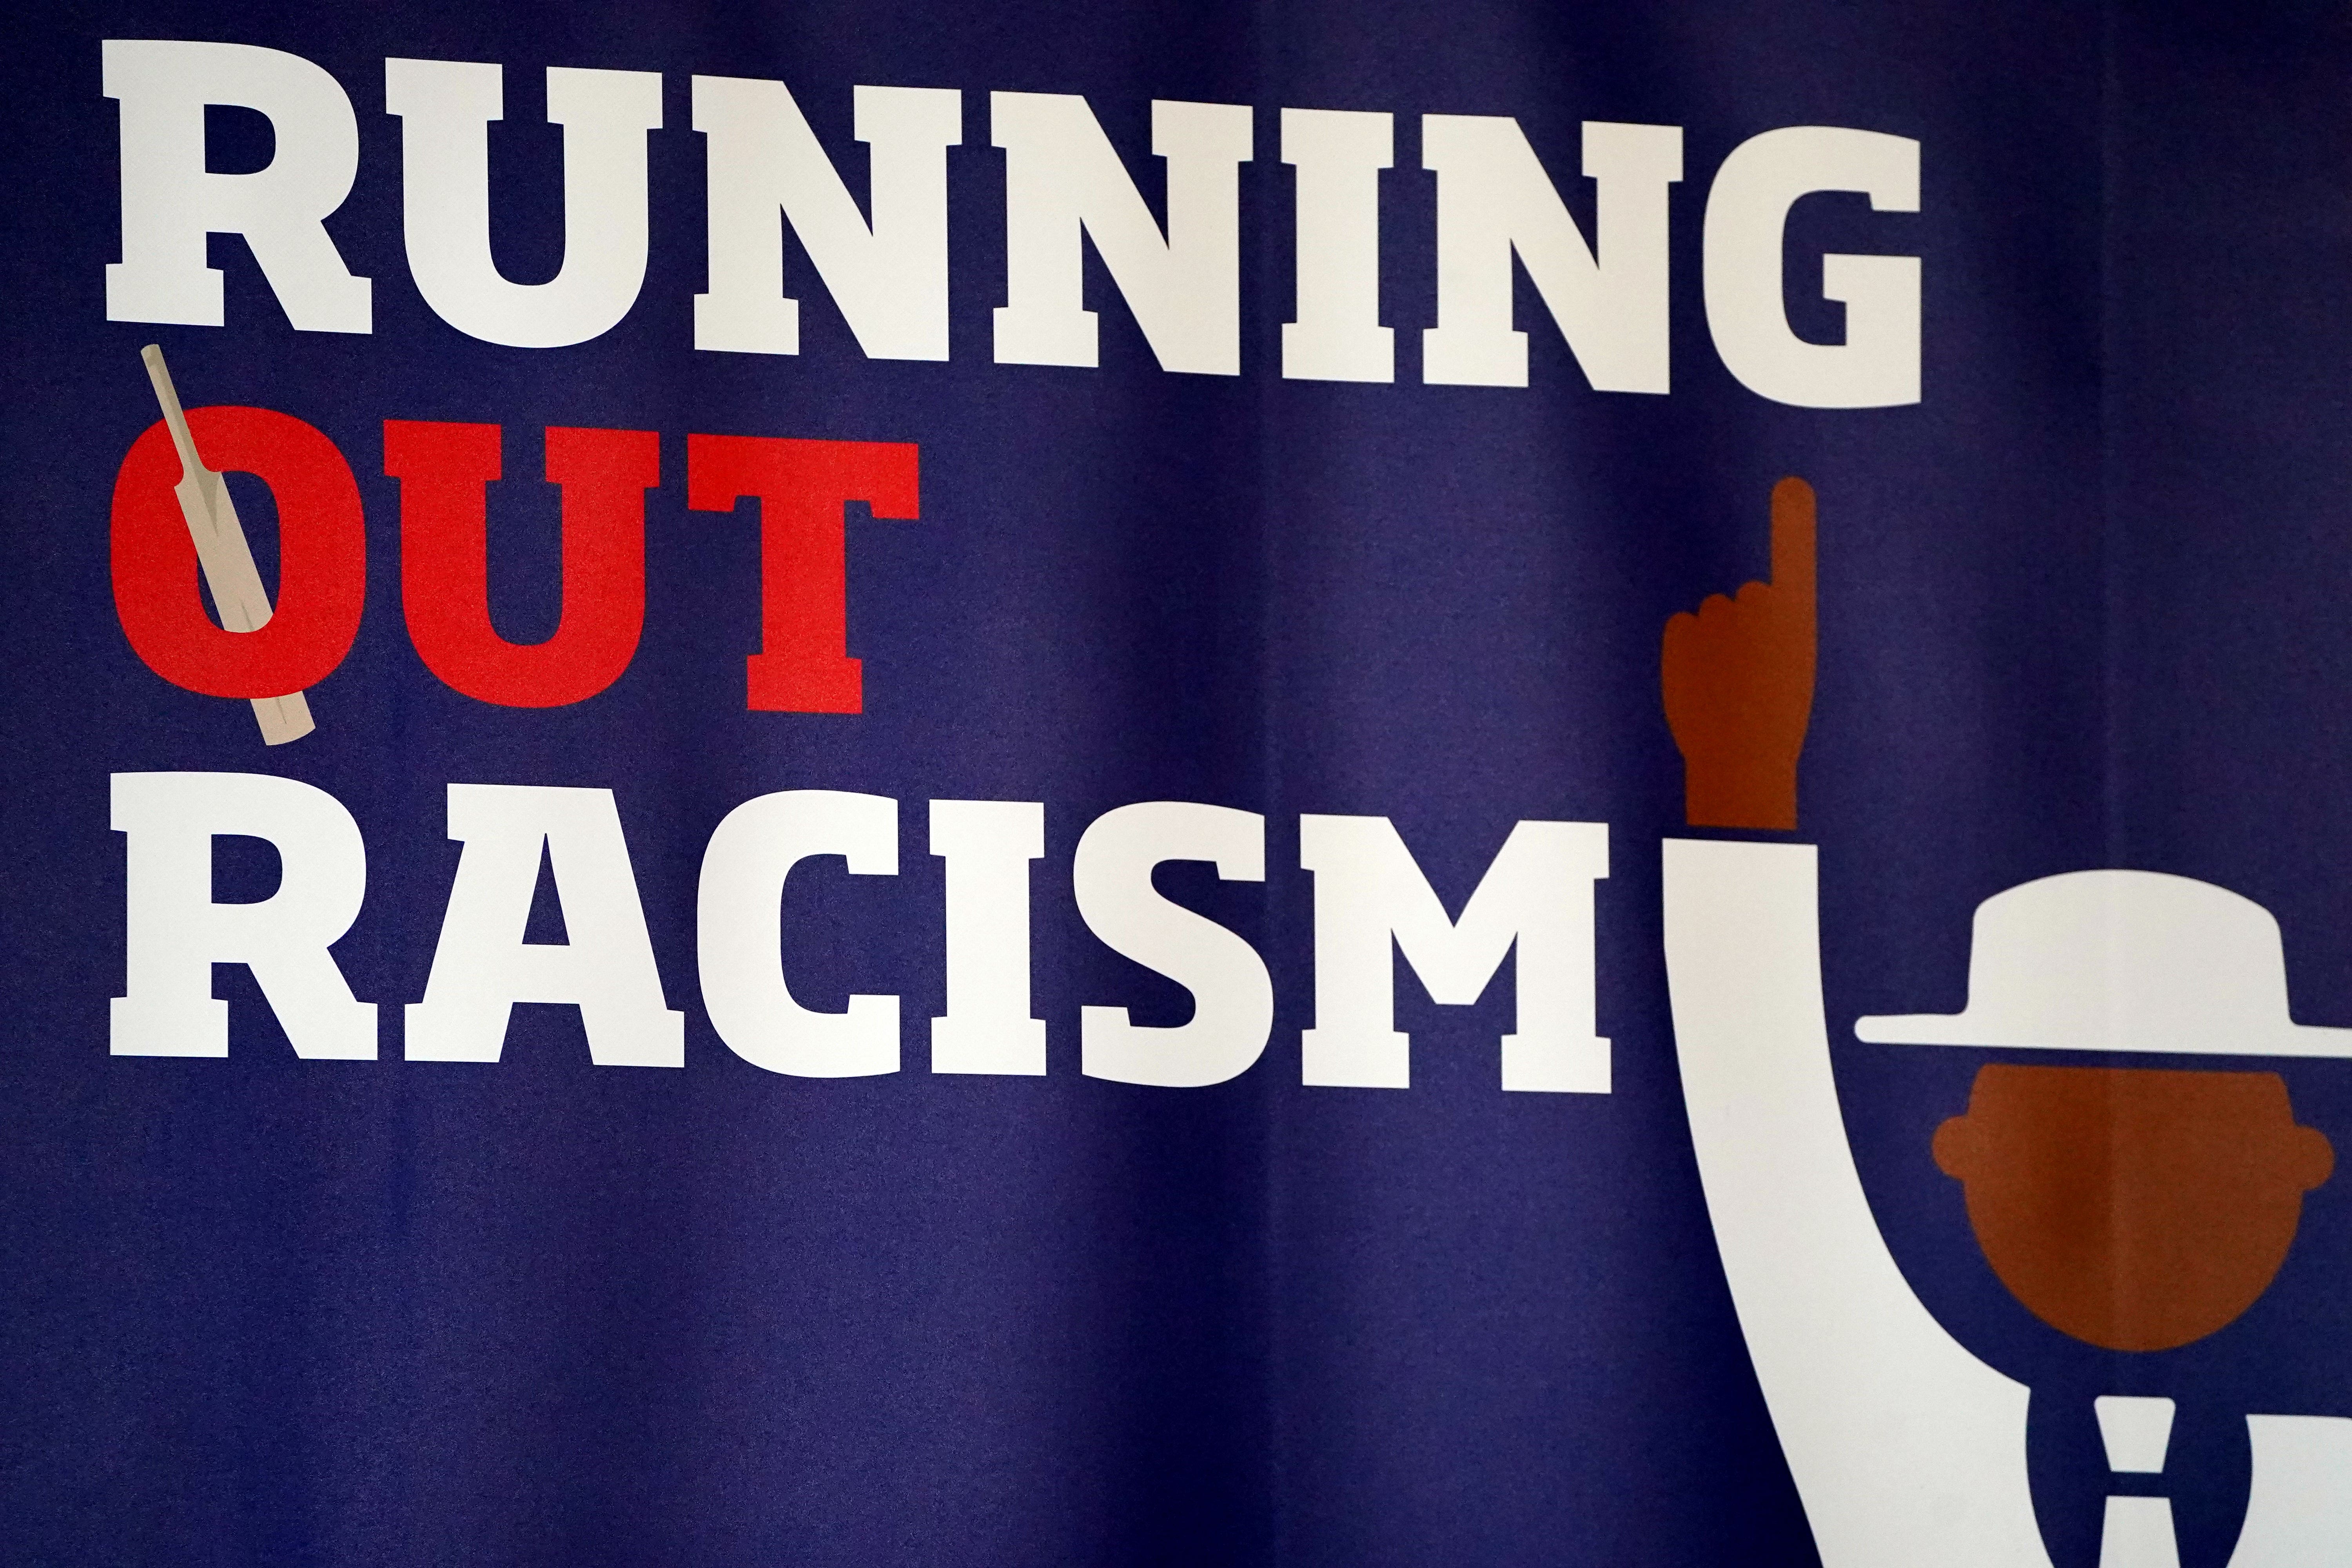 Four members of Cricket Scotland’s anti-racism group resigned last year over lack of action in tackling racism